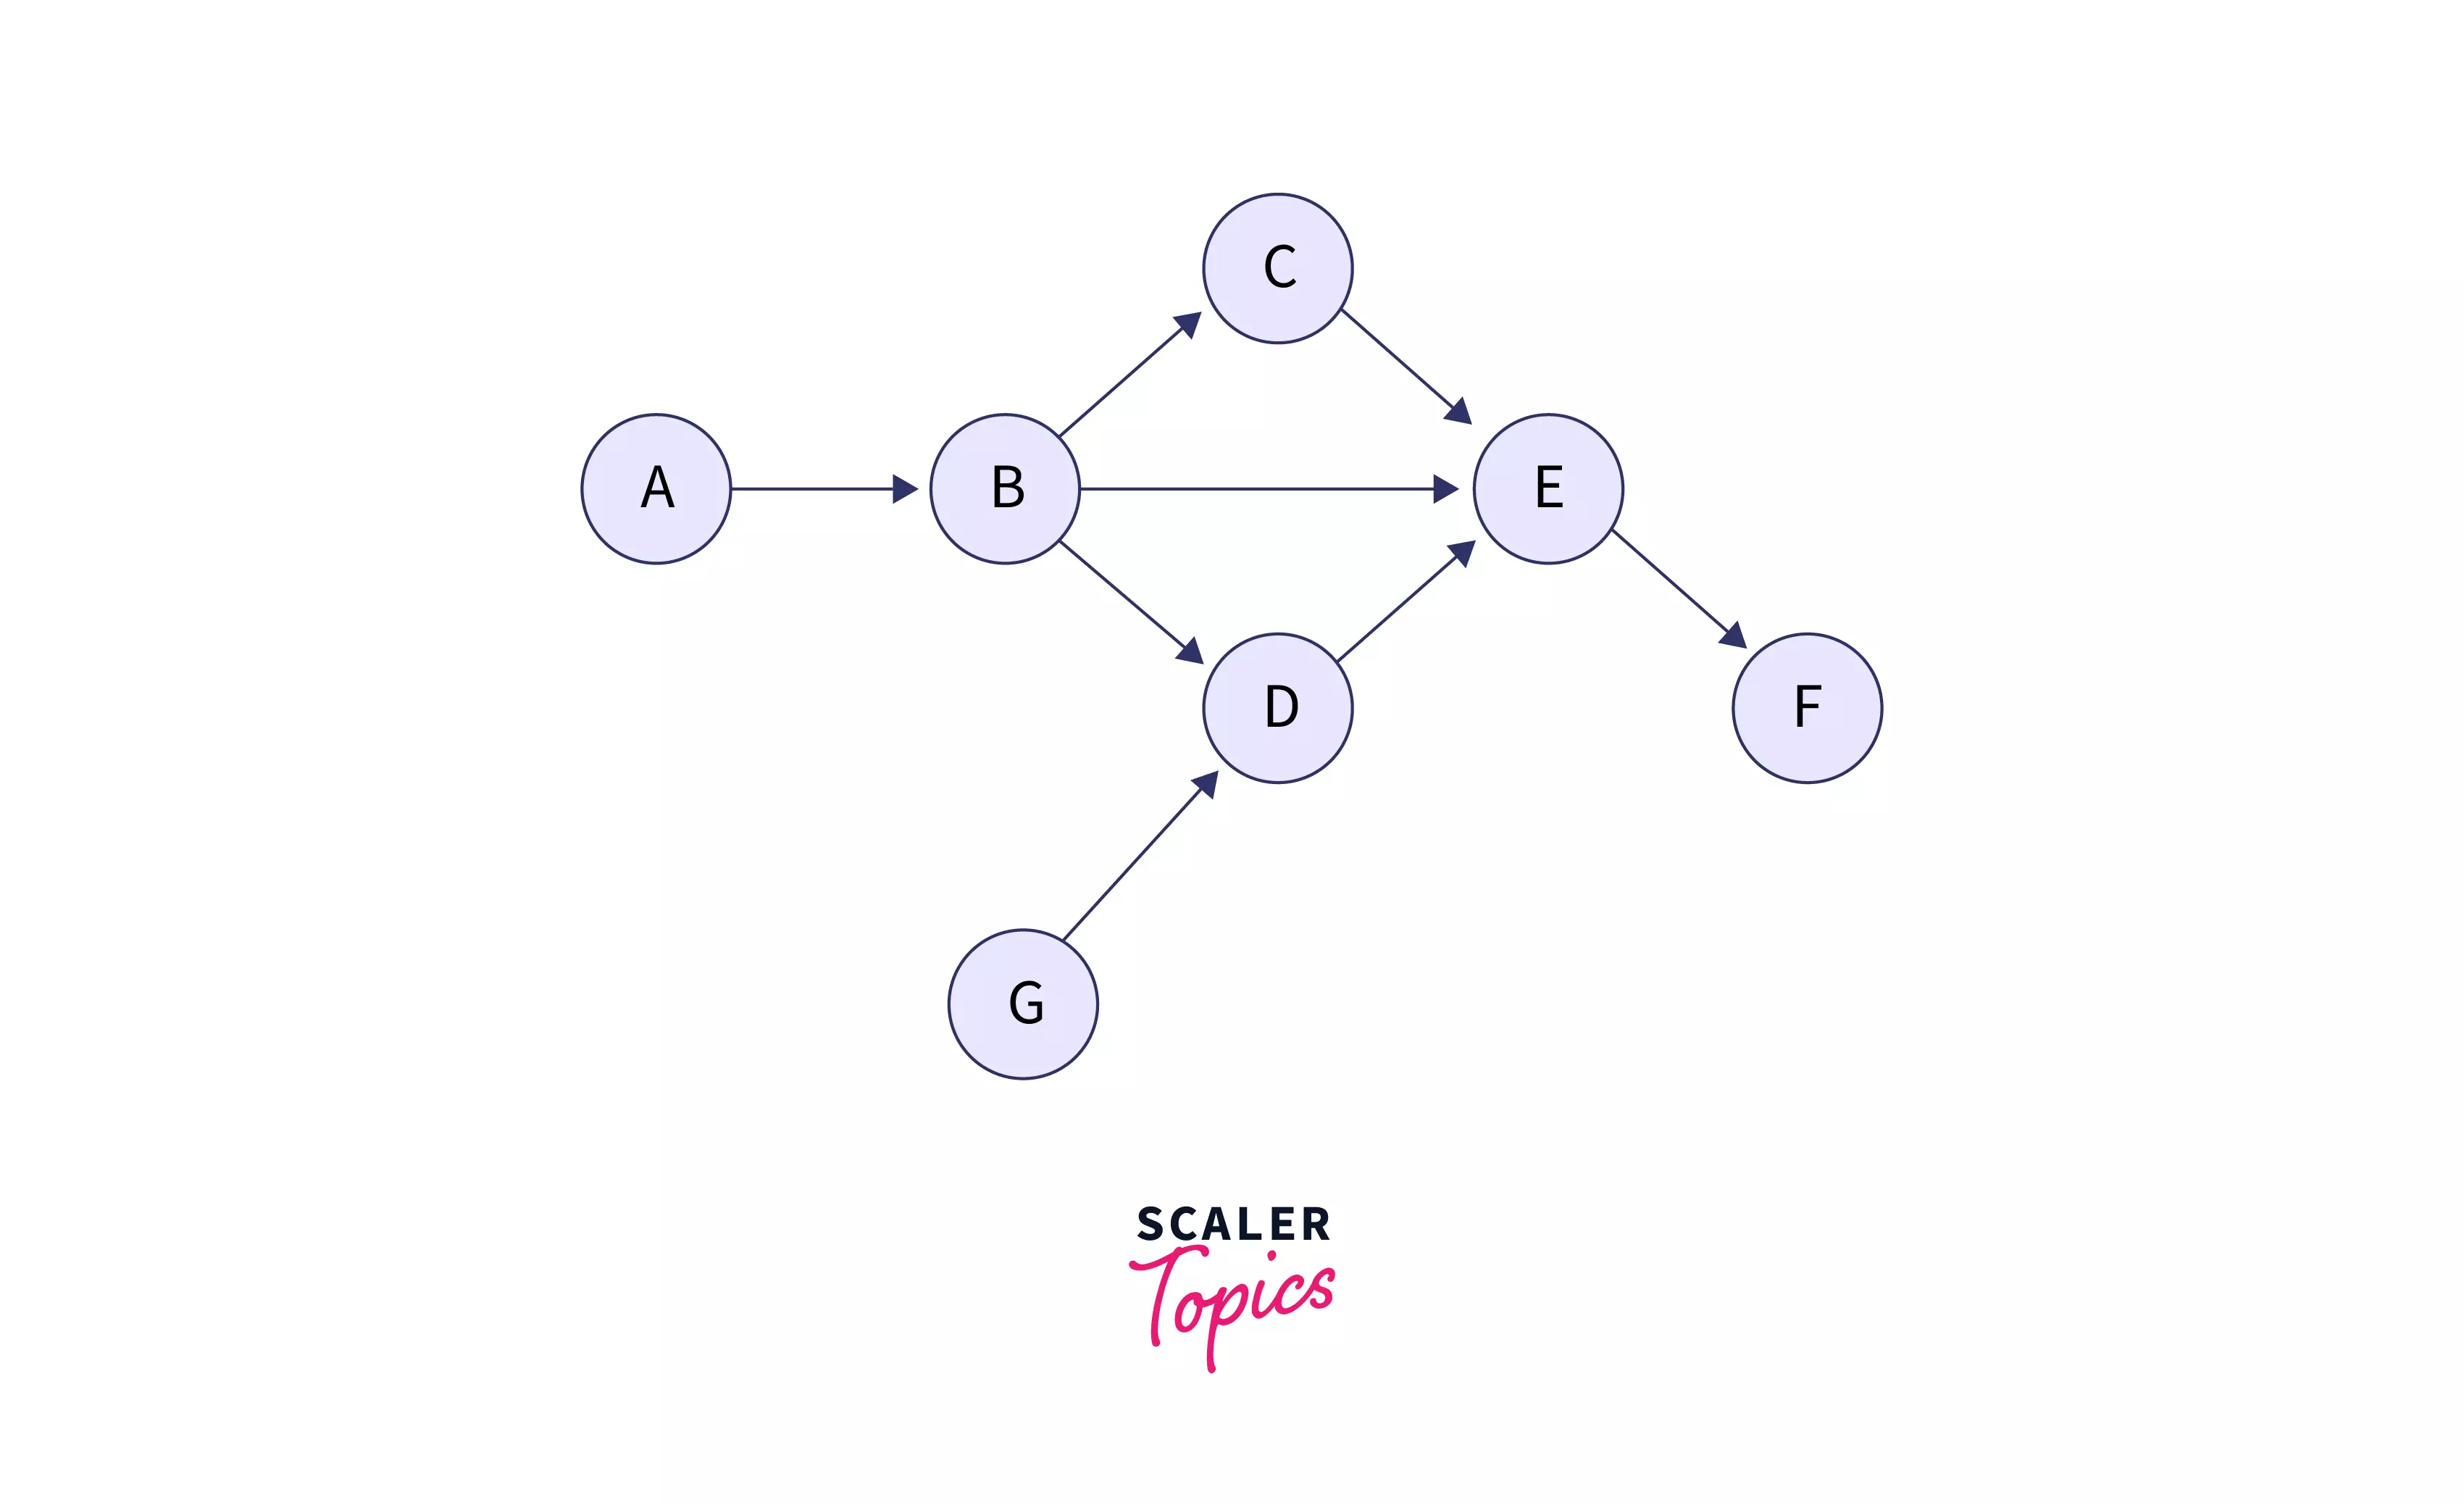 directed acyclic graph image